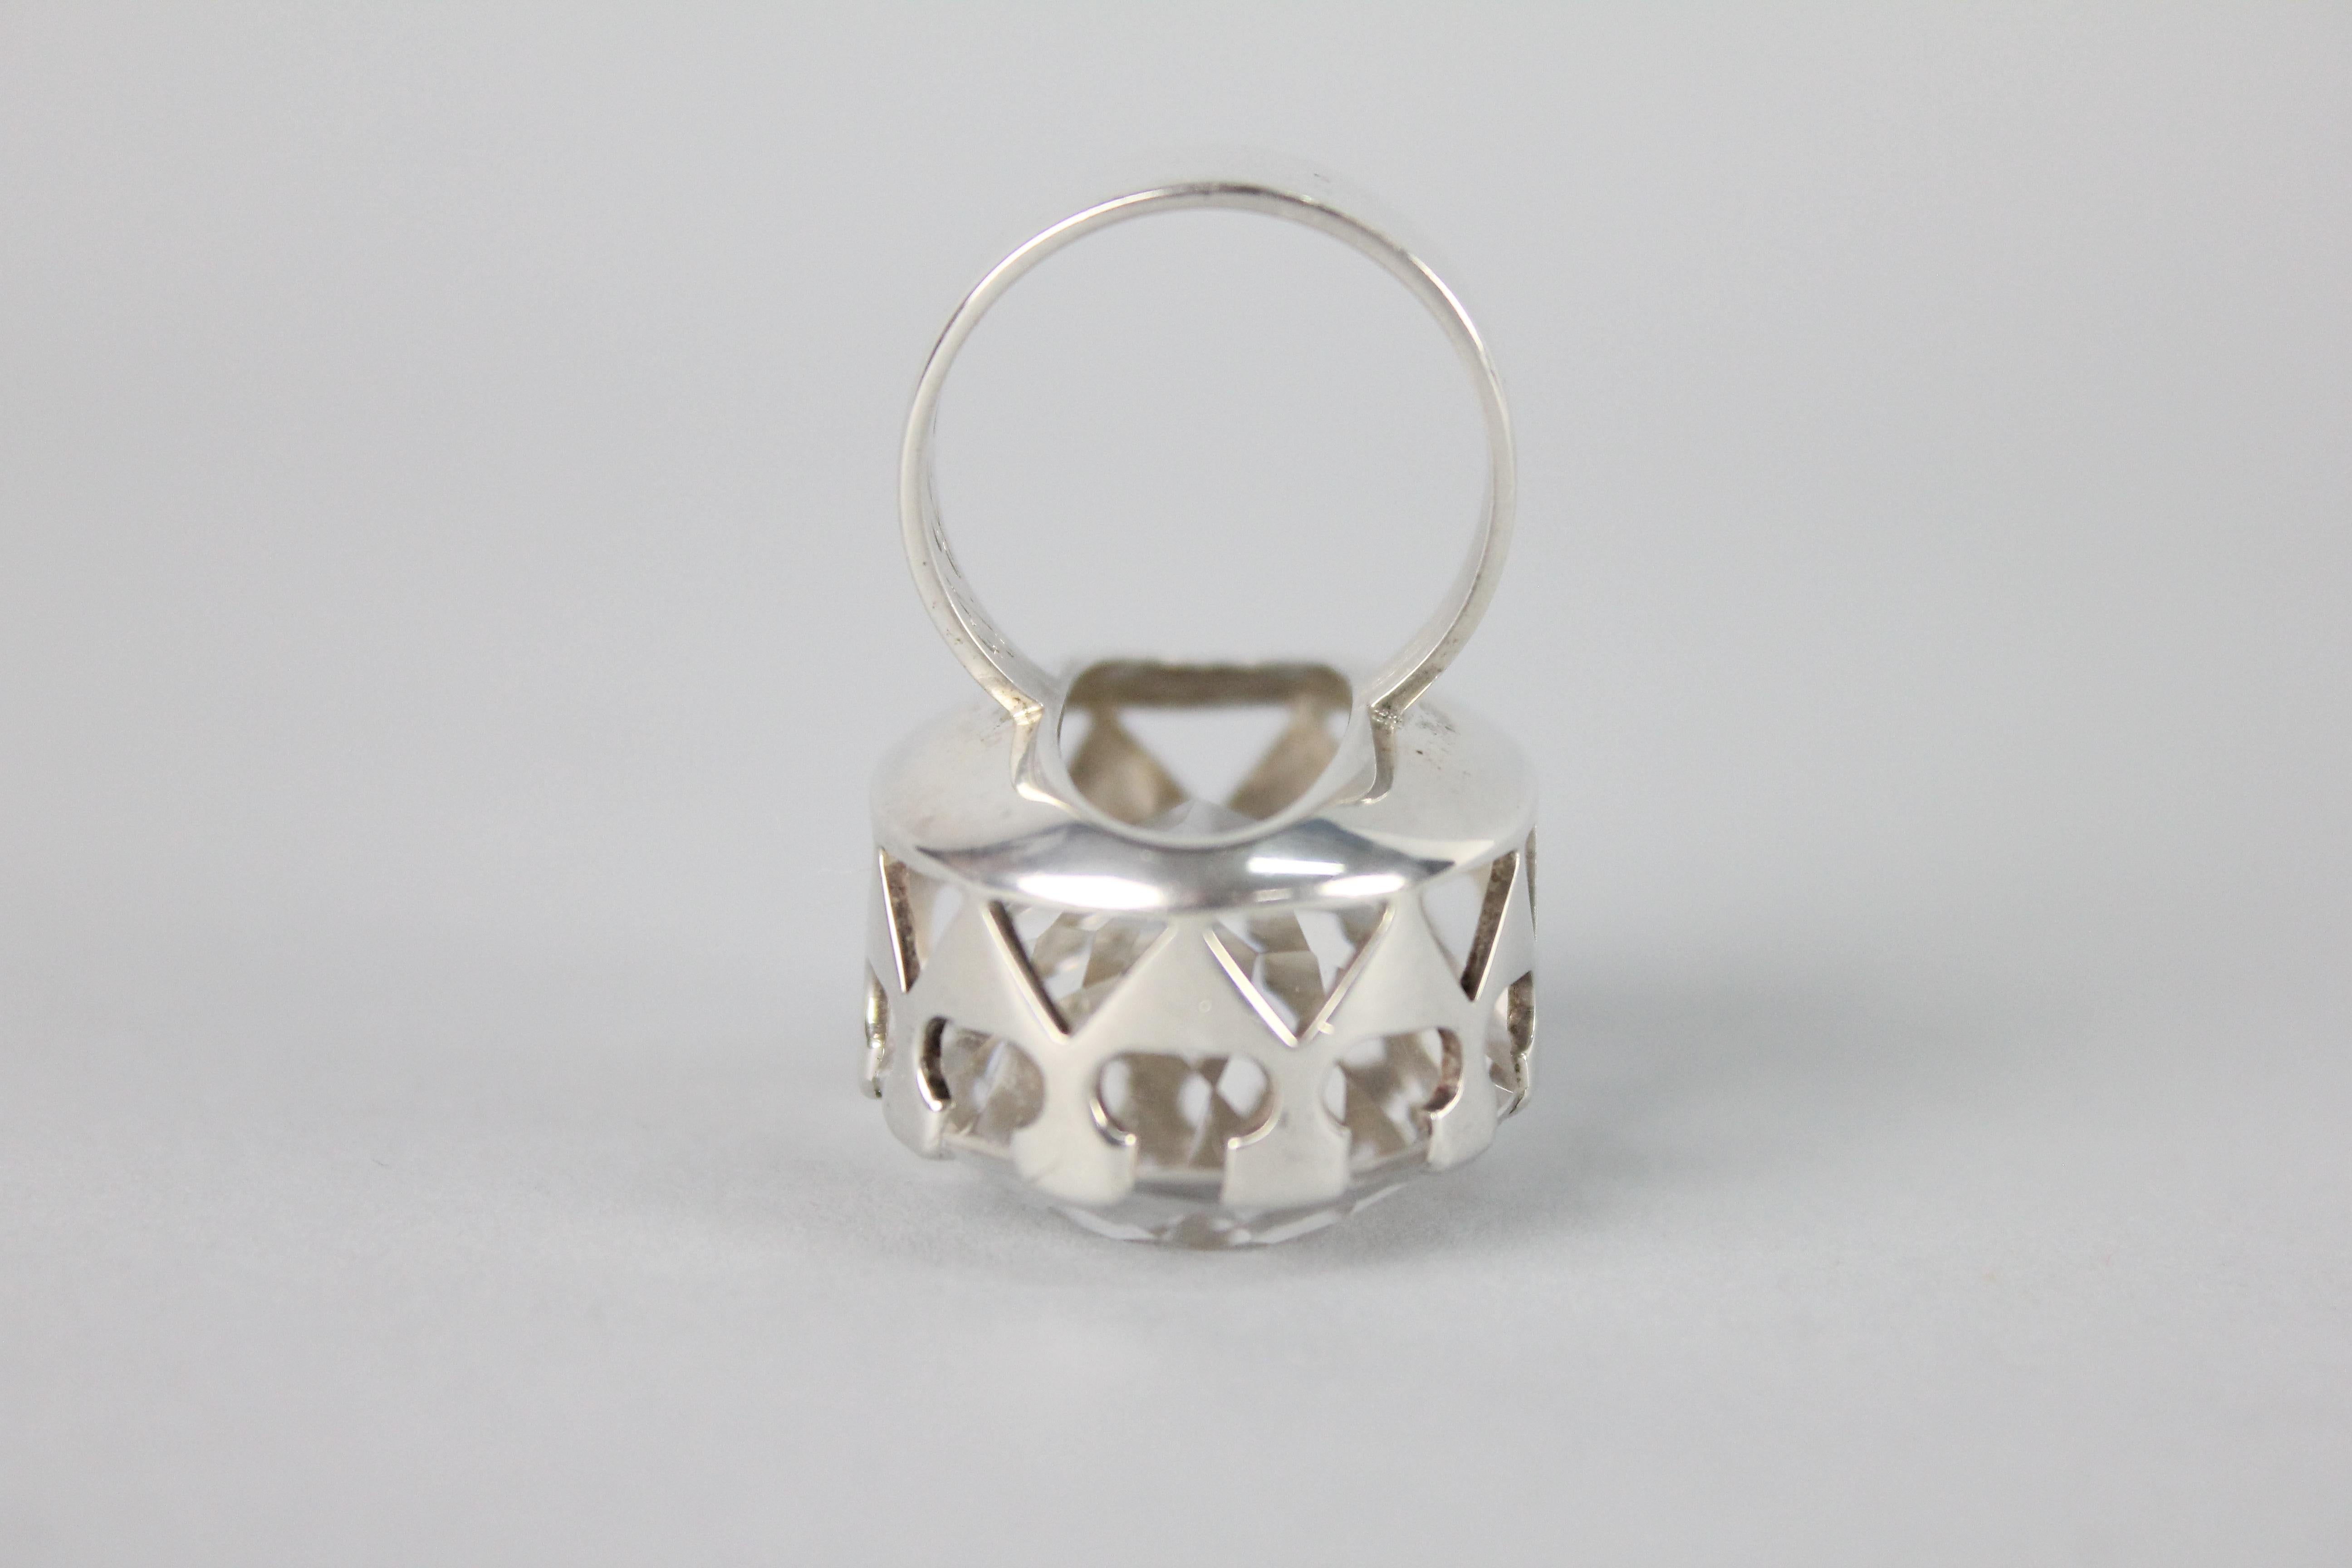 Modernist Ring in Silver and a Large Rock Crystal by Kaplan, Stockholm, 1968 For Sale 2